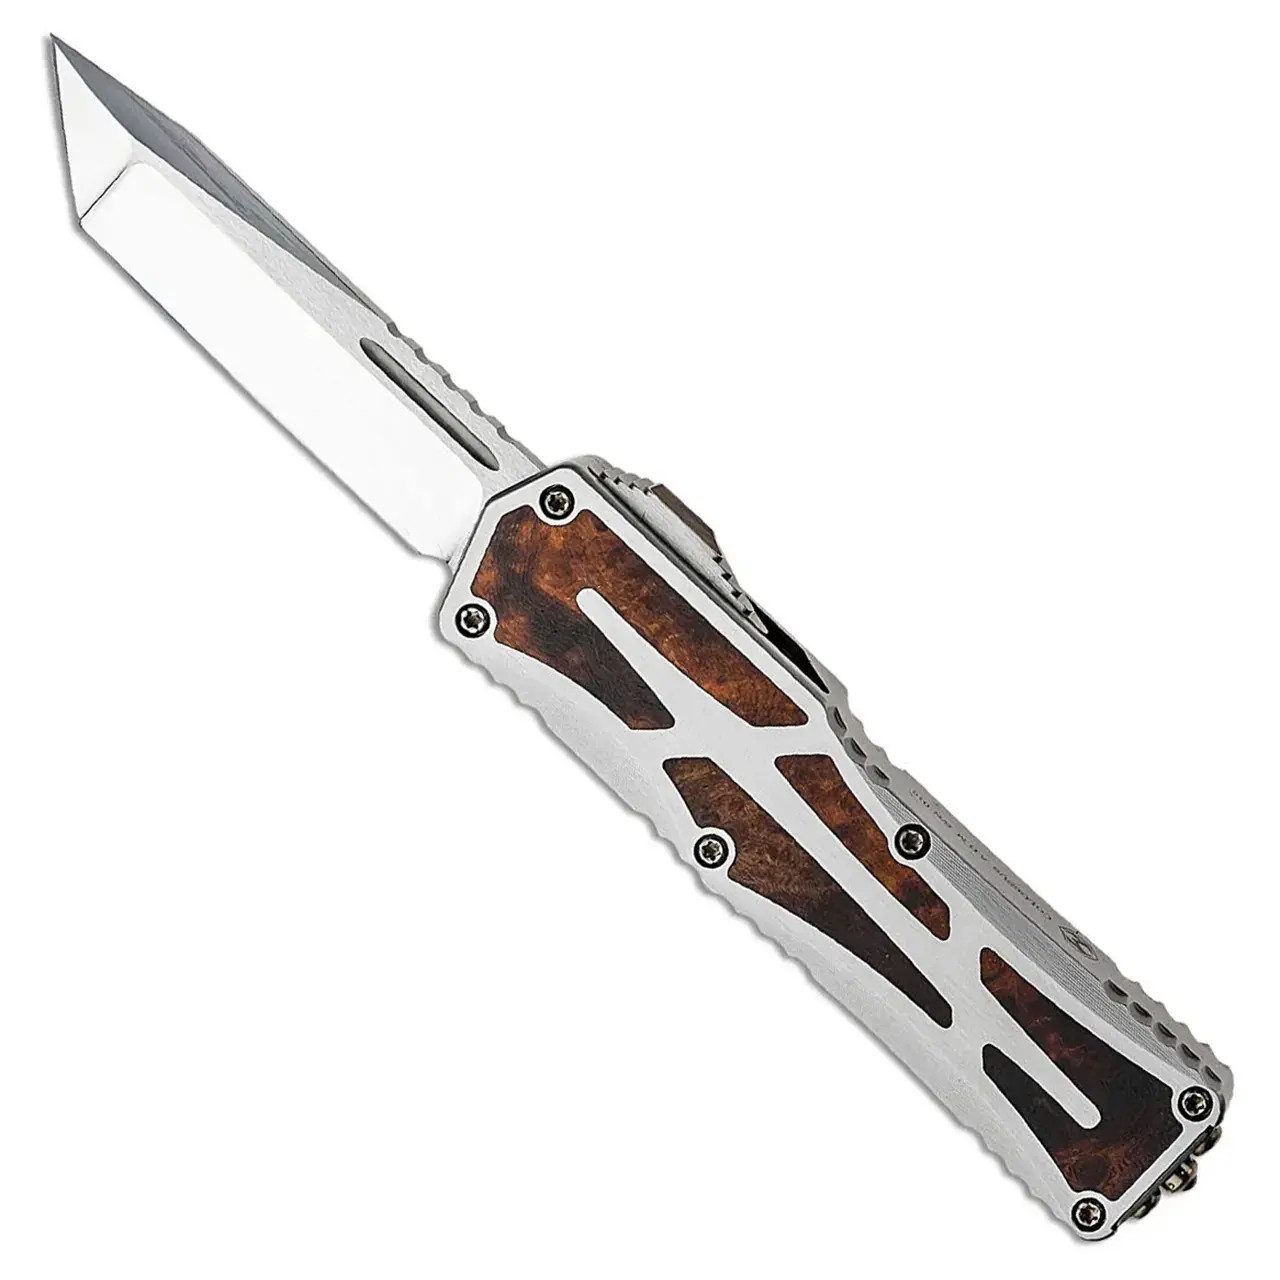 https://cdn11.bigcommerce.com/s-1tyihs272l/images/stencil/original/products/8198/19059/Heretic-Custom-Colossus-Tanto-416-Stainless-Handle-Desert-Ironwood-Inlays-Mirror-Polish-Blade__25501.1685650247.jpg